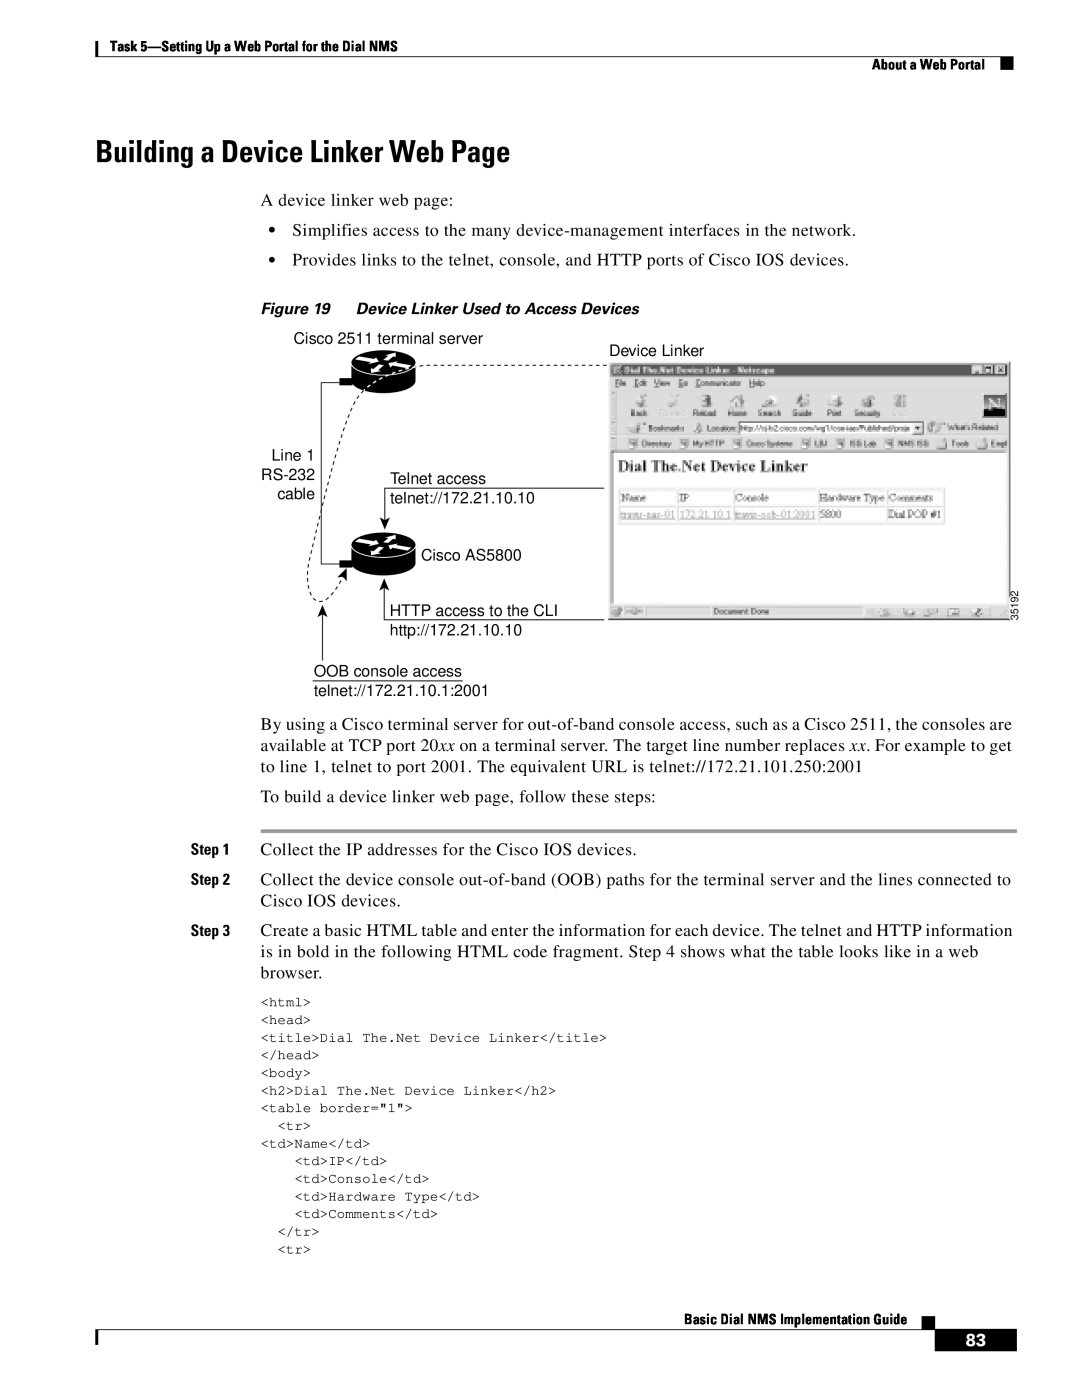 Cisco Systems Dial NMS manual Building a Device Linker Web Page 